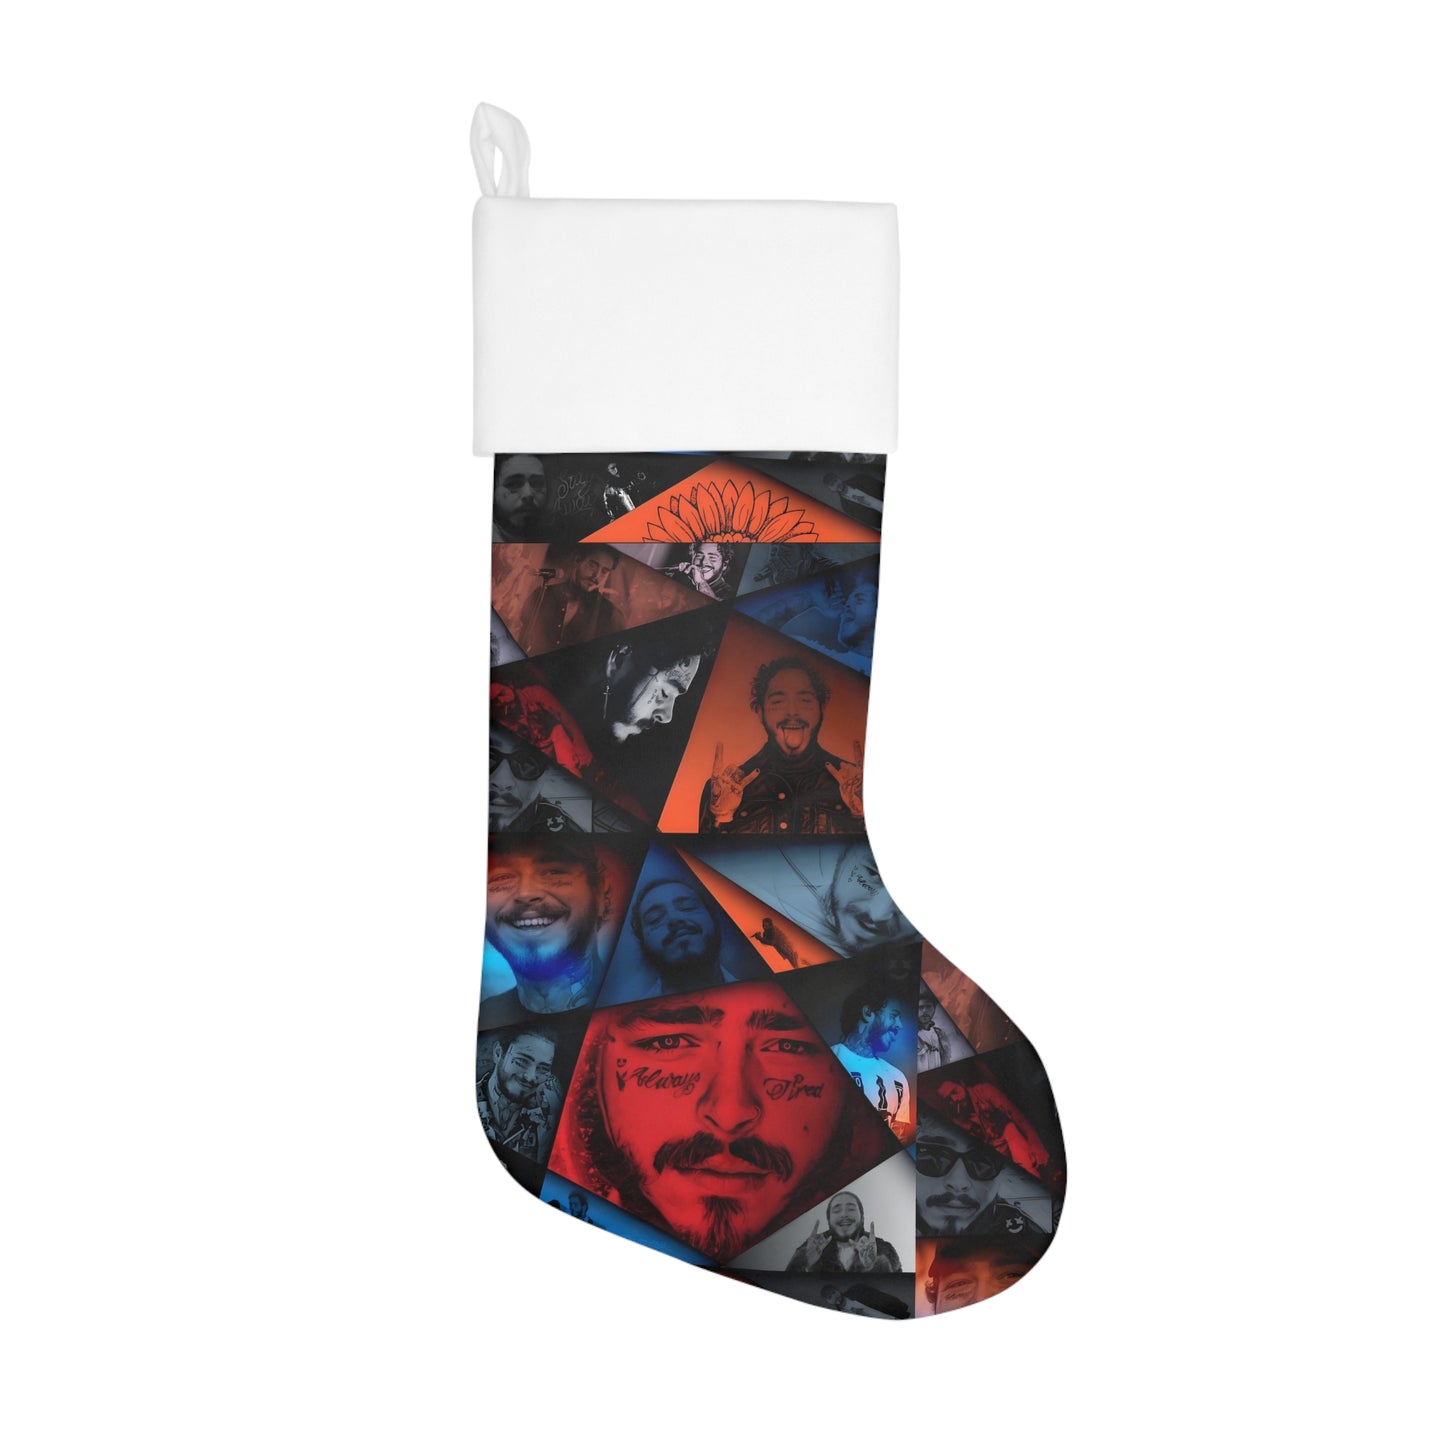 Post Malone Crystal Portaits Collage Christmas Holiday Stocking